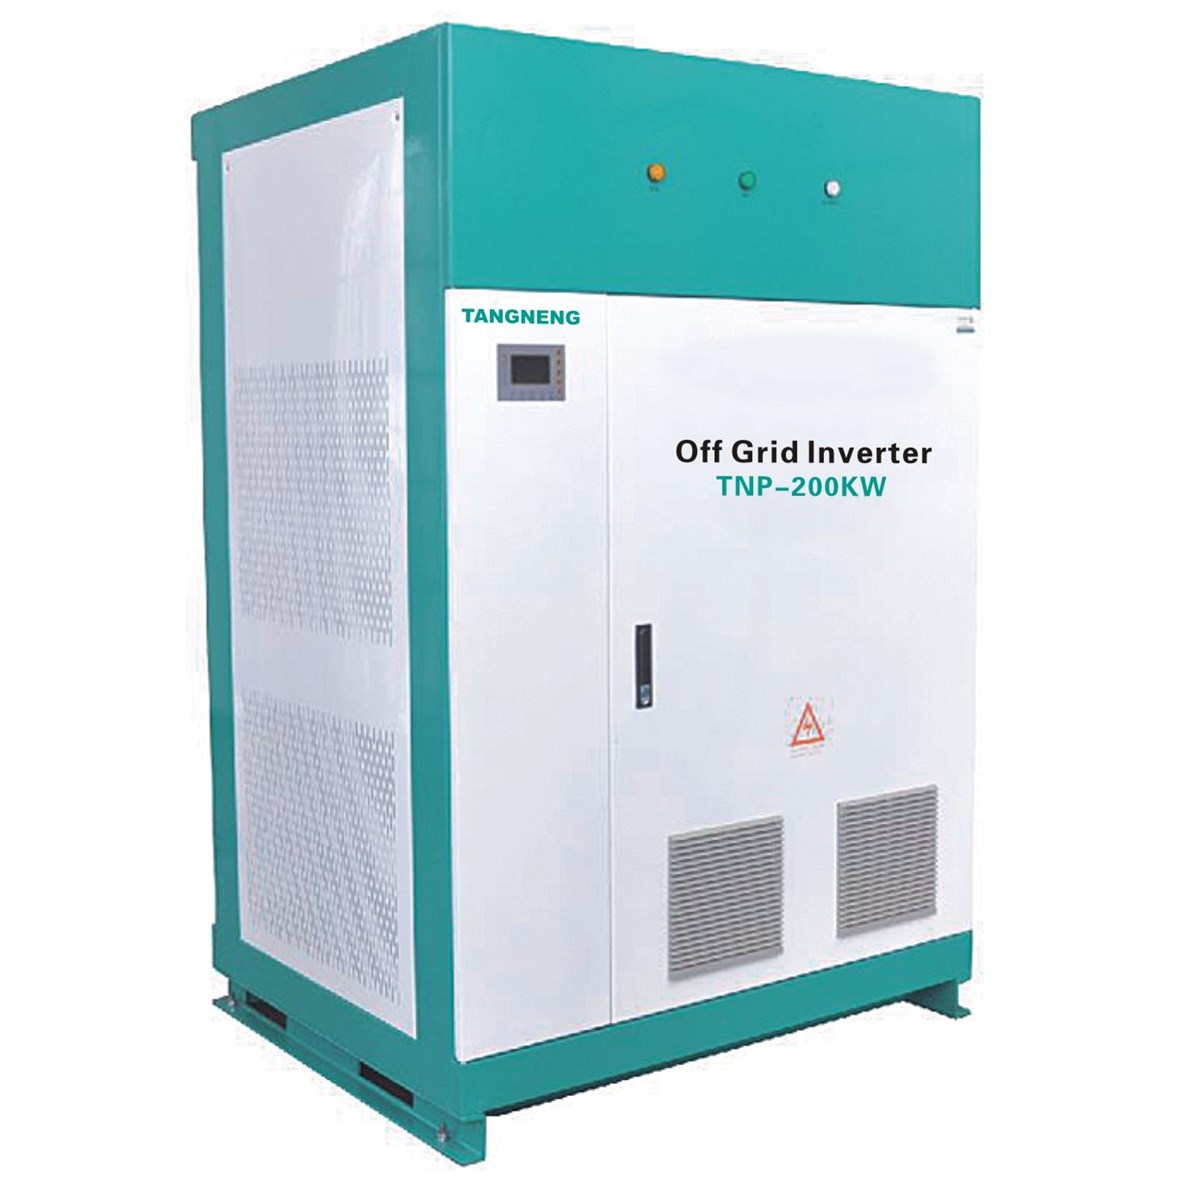 OffGrid InverterMiddle Frequency Pure Sine Wave Inverter